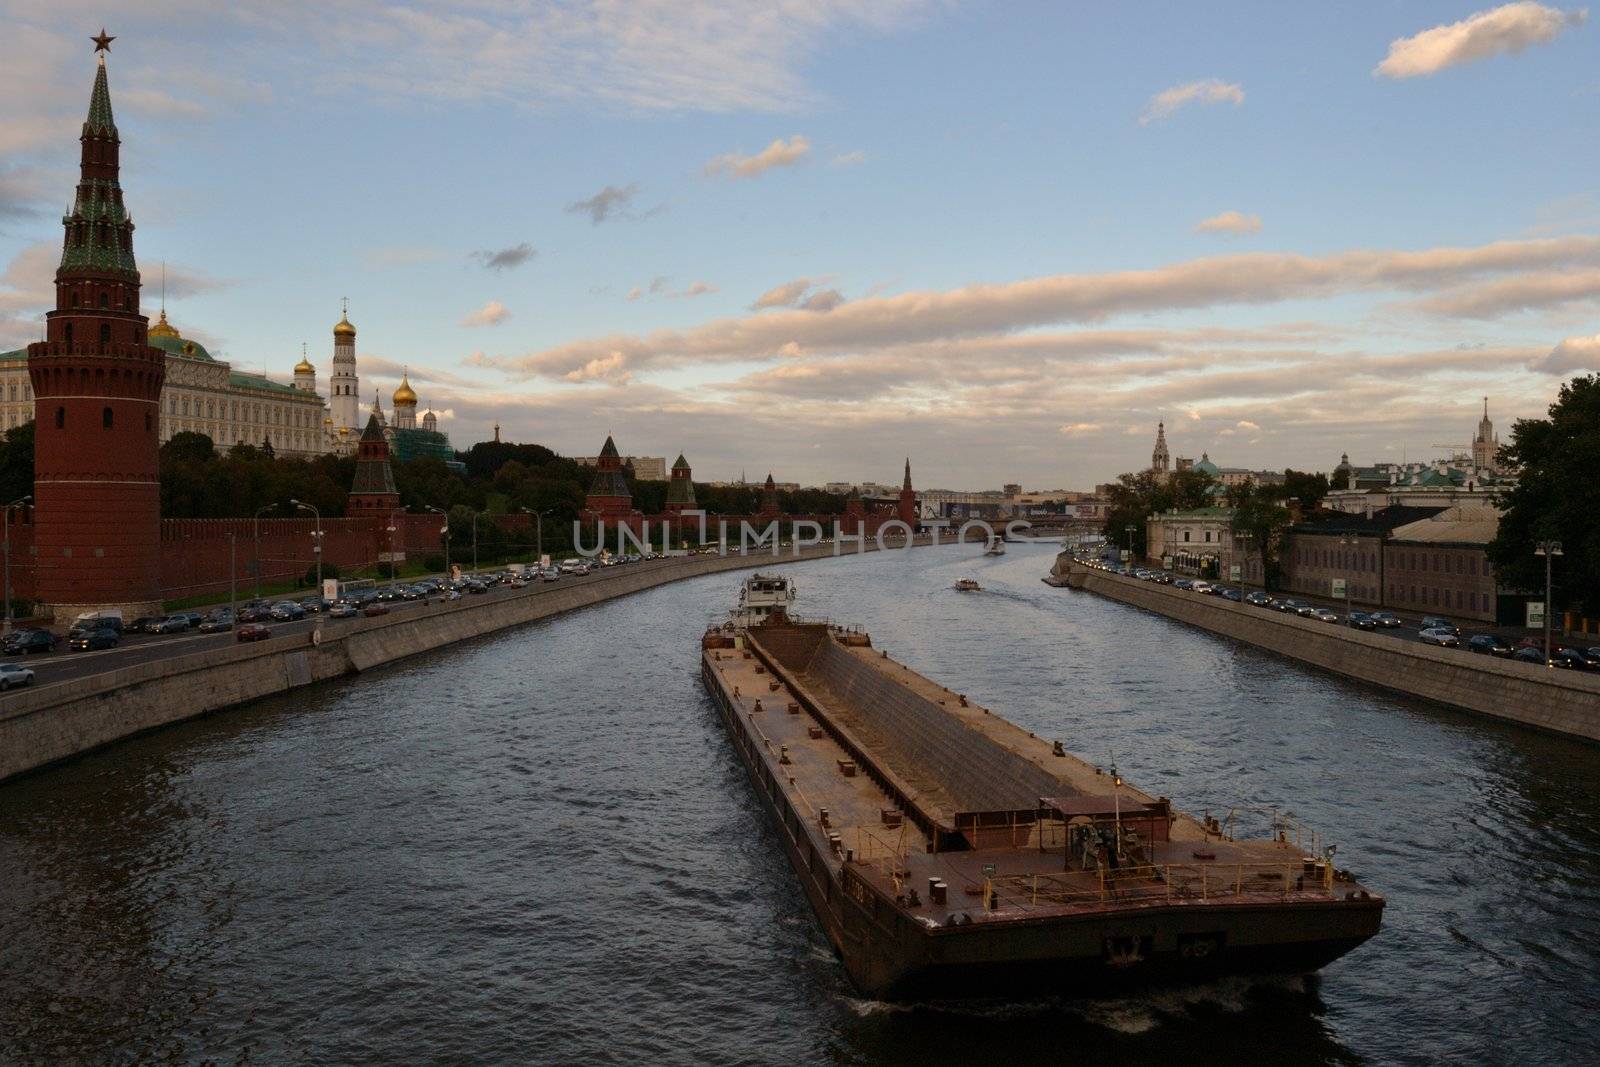 The barge, floating down the Moscow river